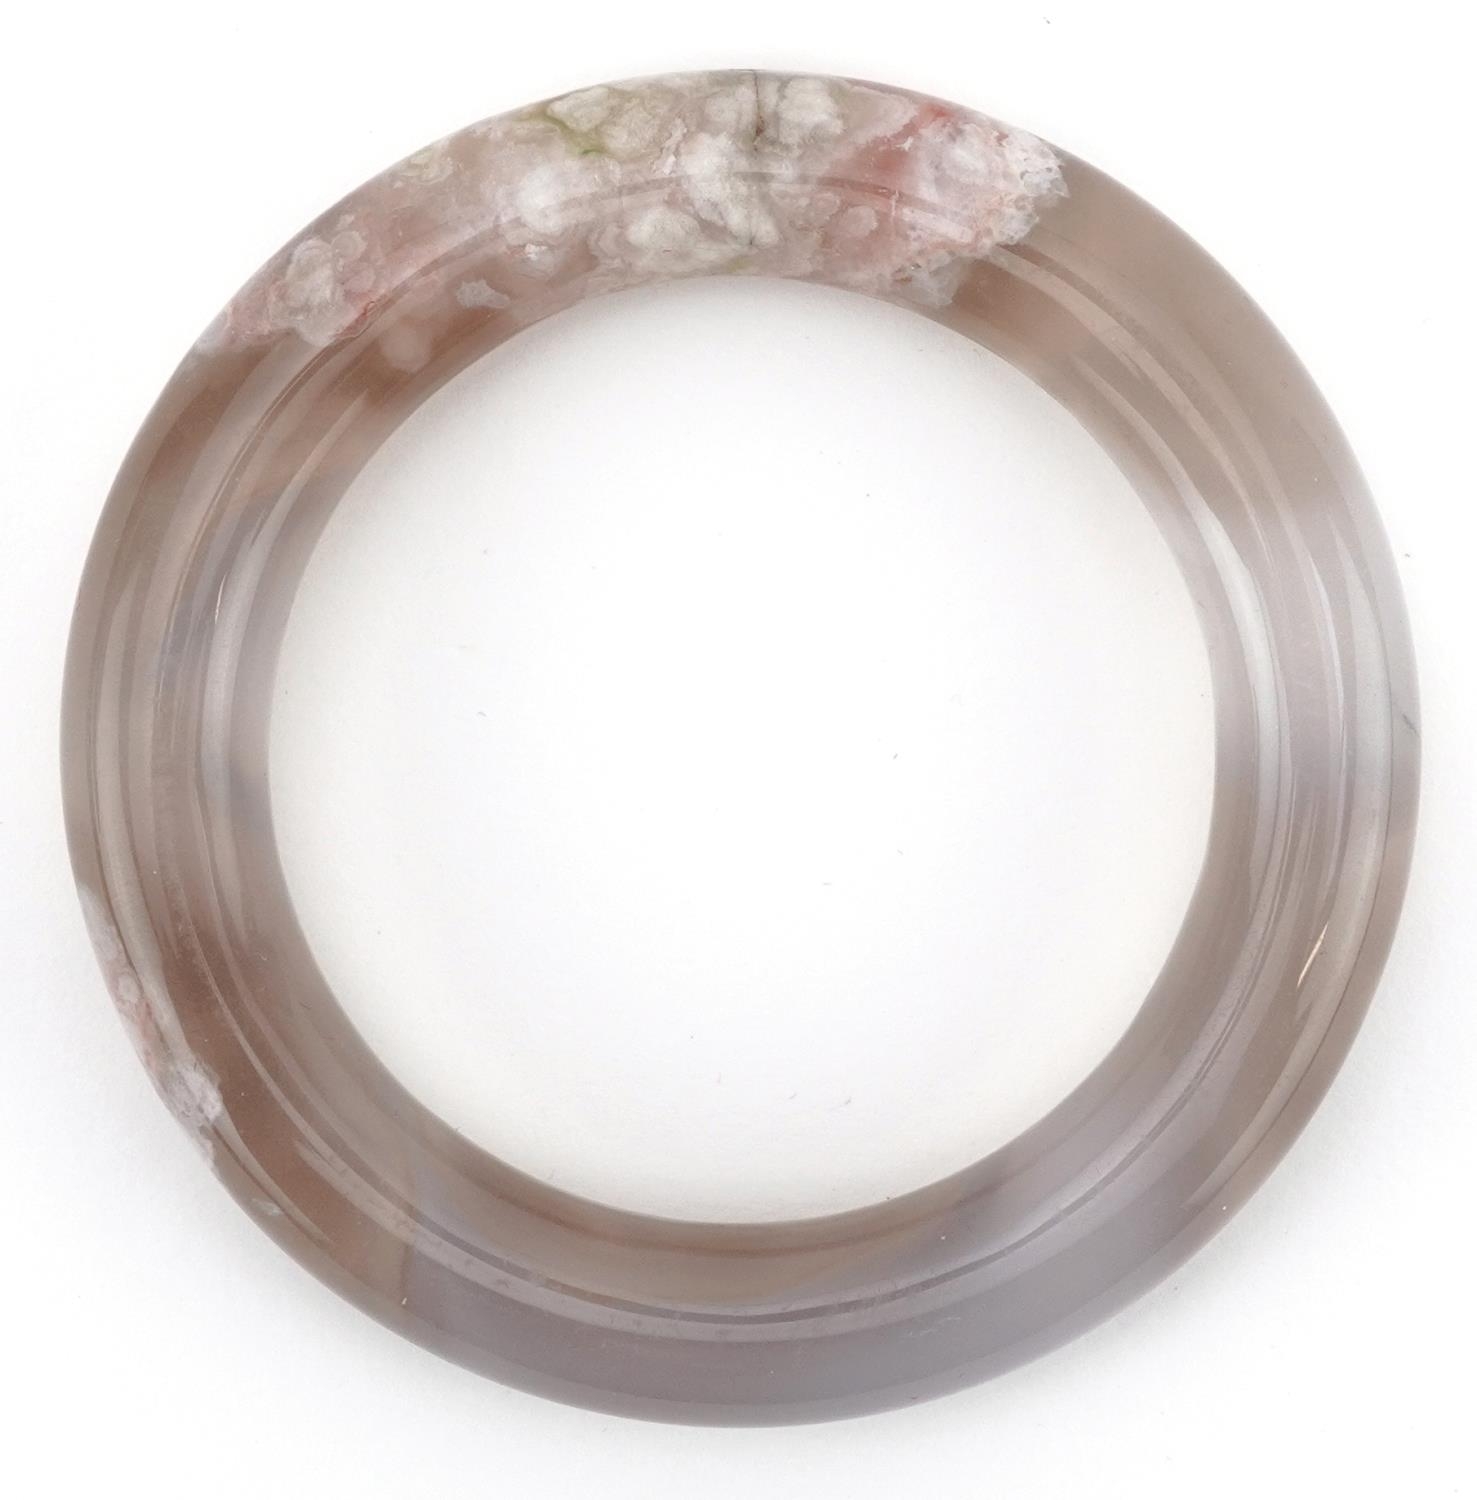 Chinese agate bangle, 8cm in diameter, 66.2g - Image 3 of 4